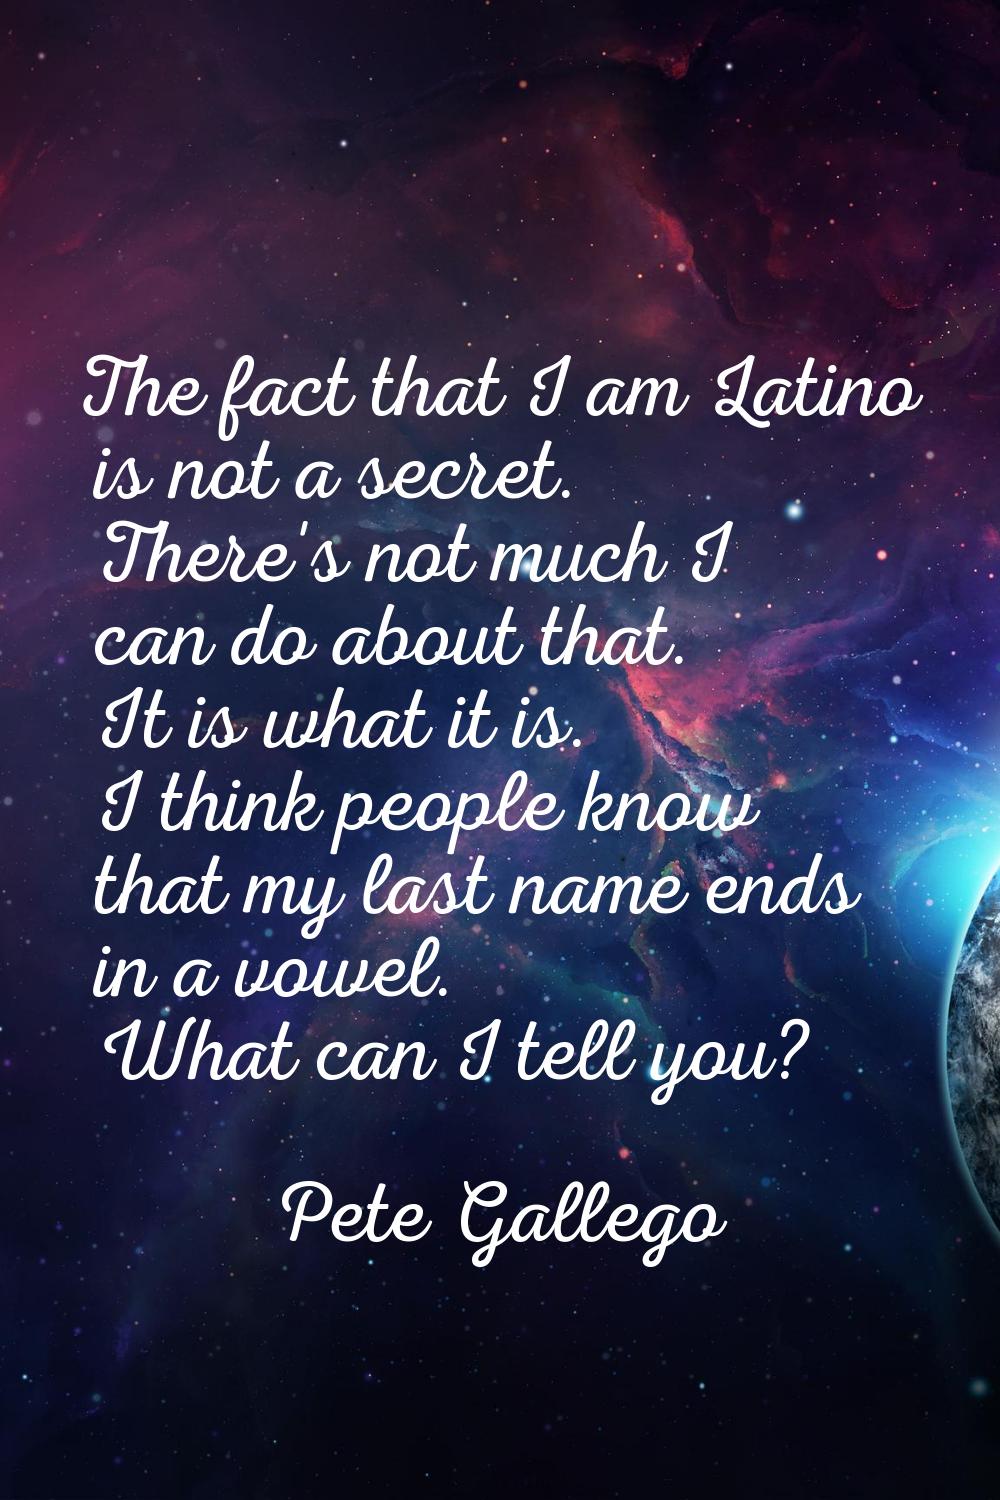 The fact that I am Latino is not a secret. There's not much I can do about that. It is what it is. 